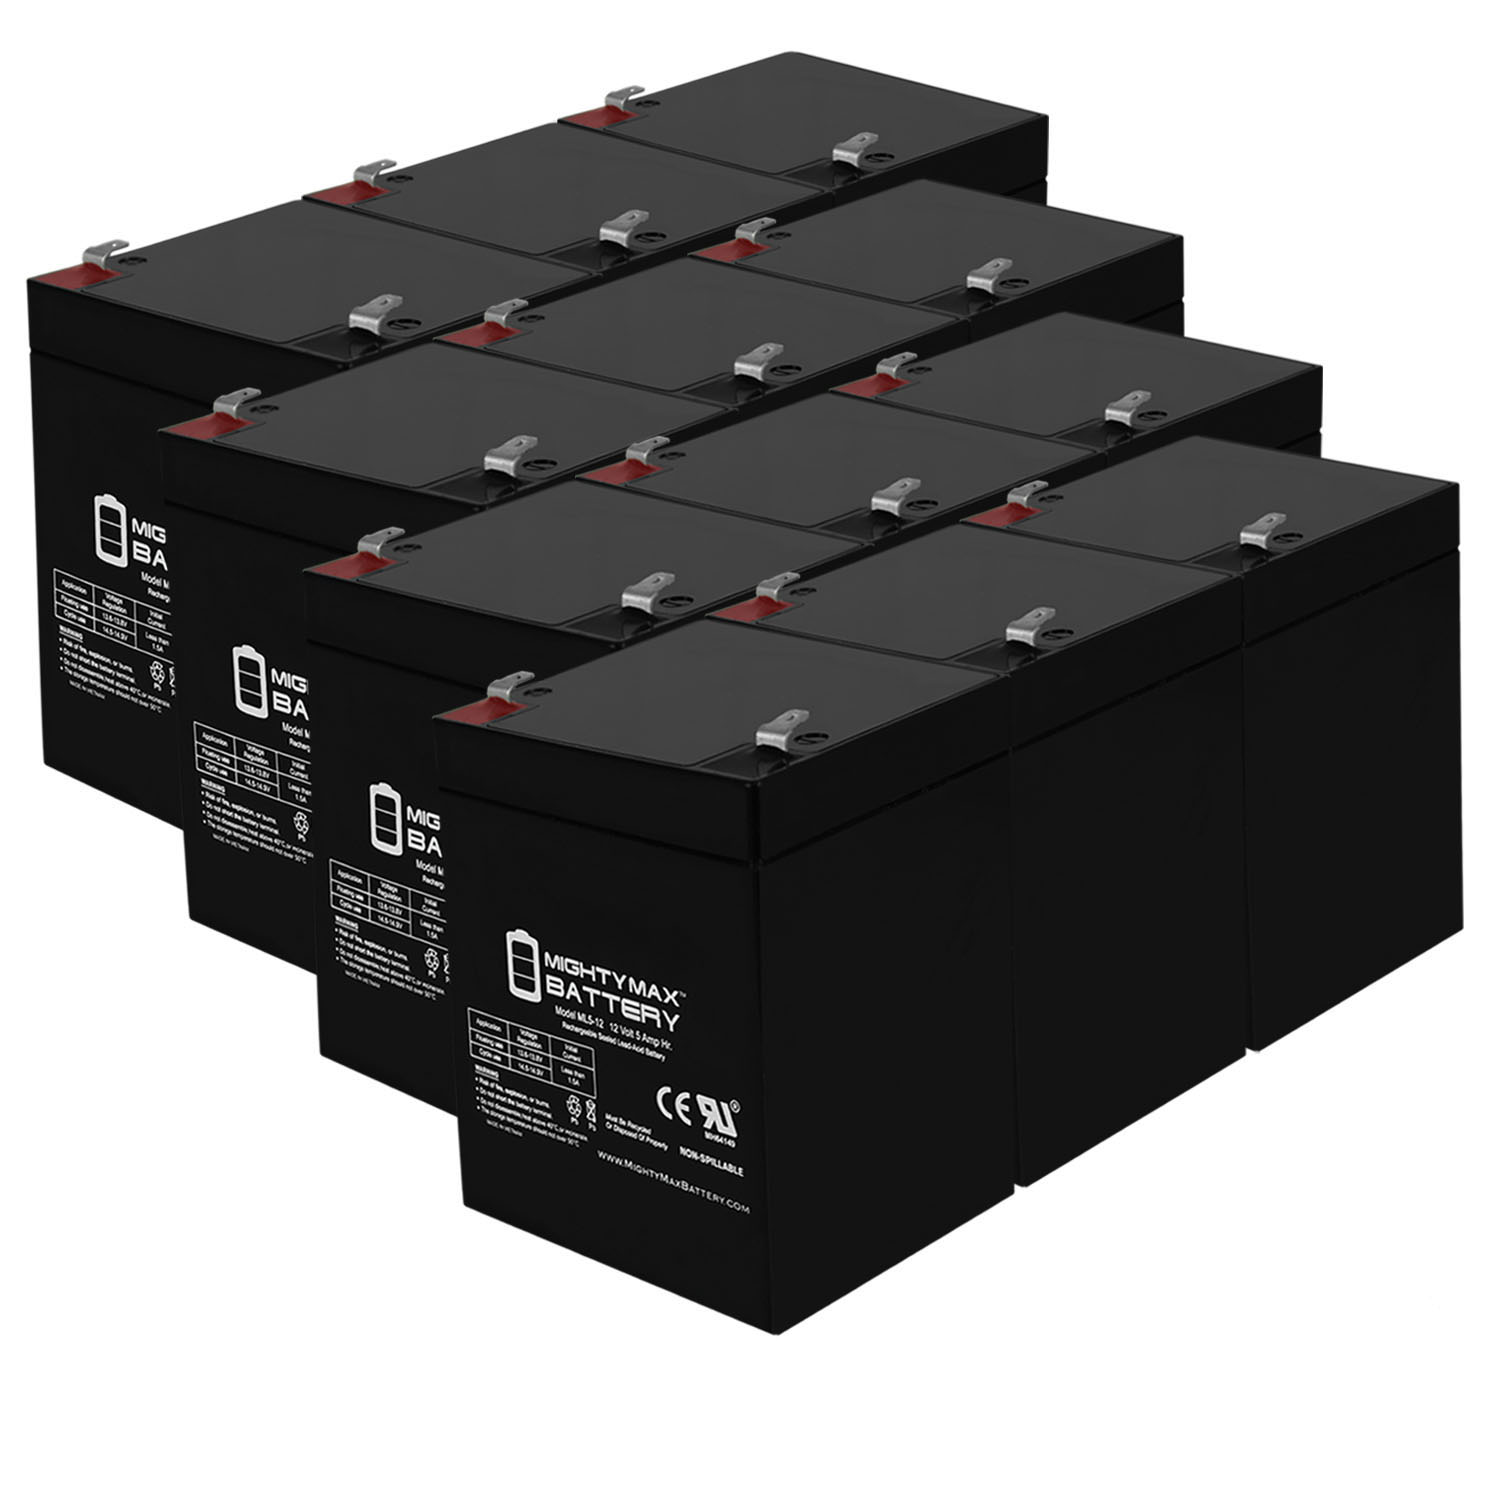 12V 5AH SLA Replacement Battery for Global Technology S412 - 12 Pack